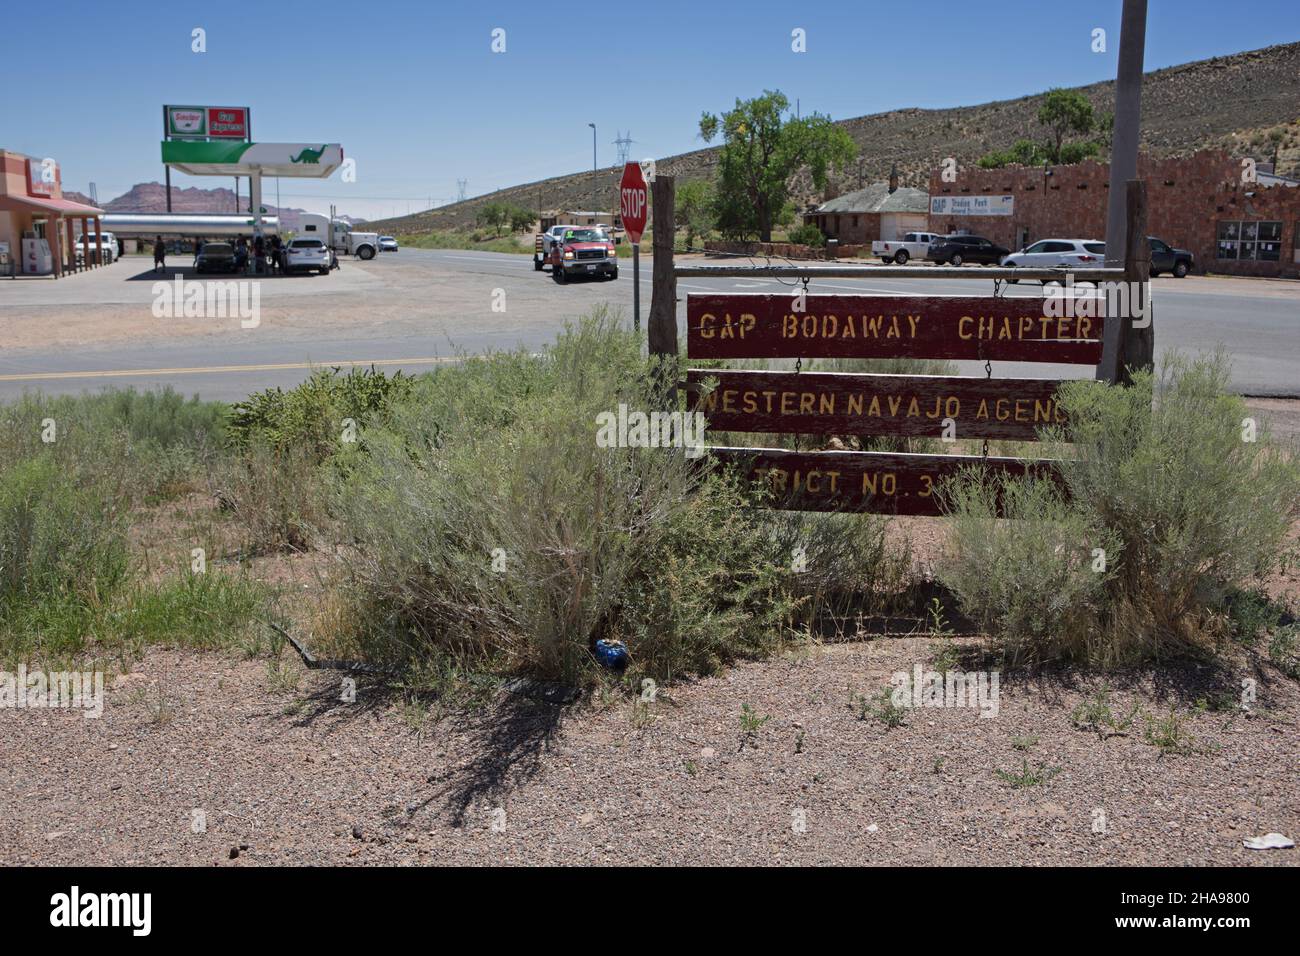 Bodaway-Gap Chapter sign near the Grand Canyon on the Navajo Nation lands on Highway 89 Stock Photo